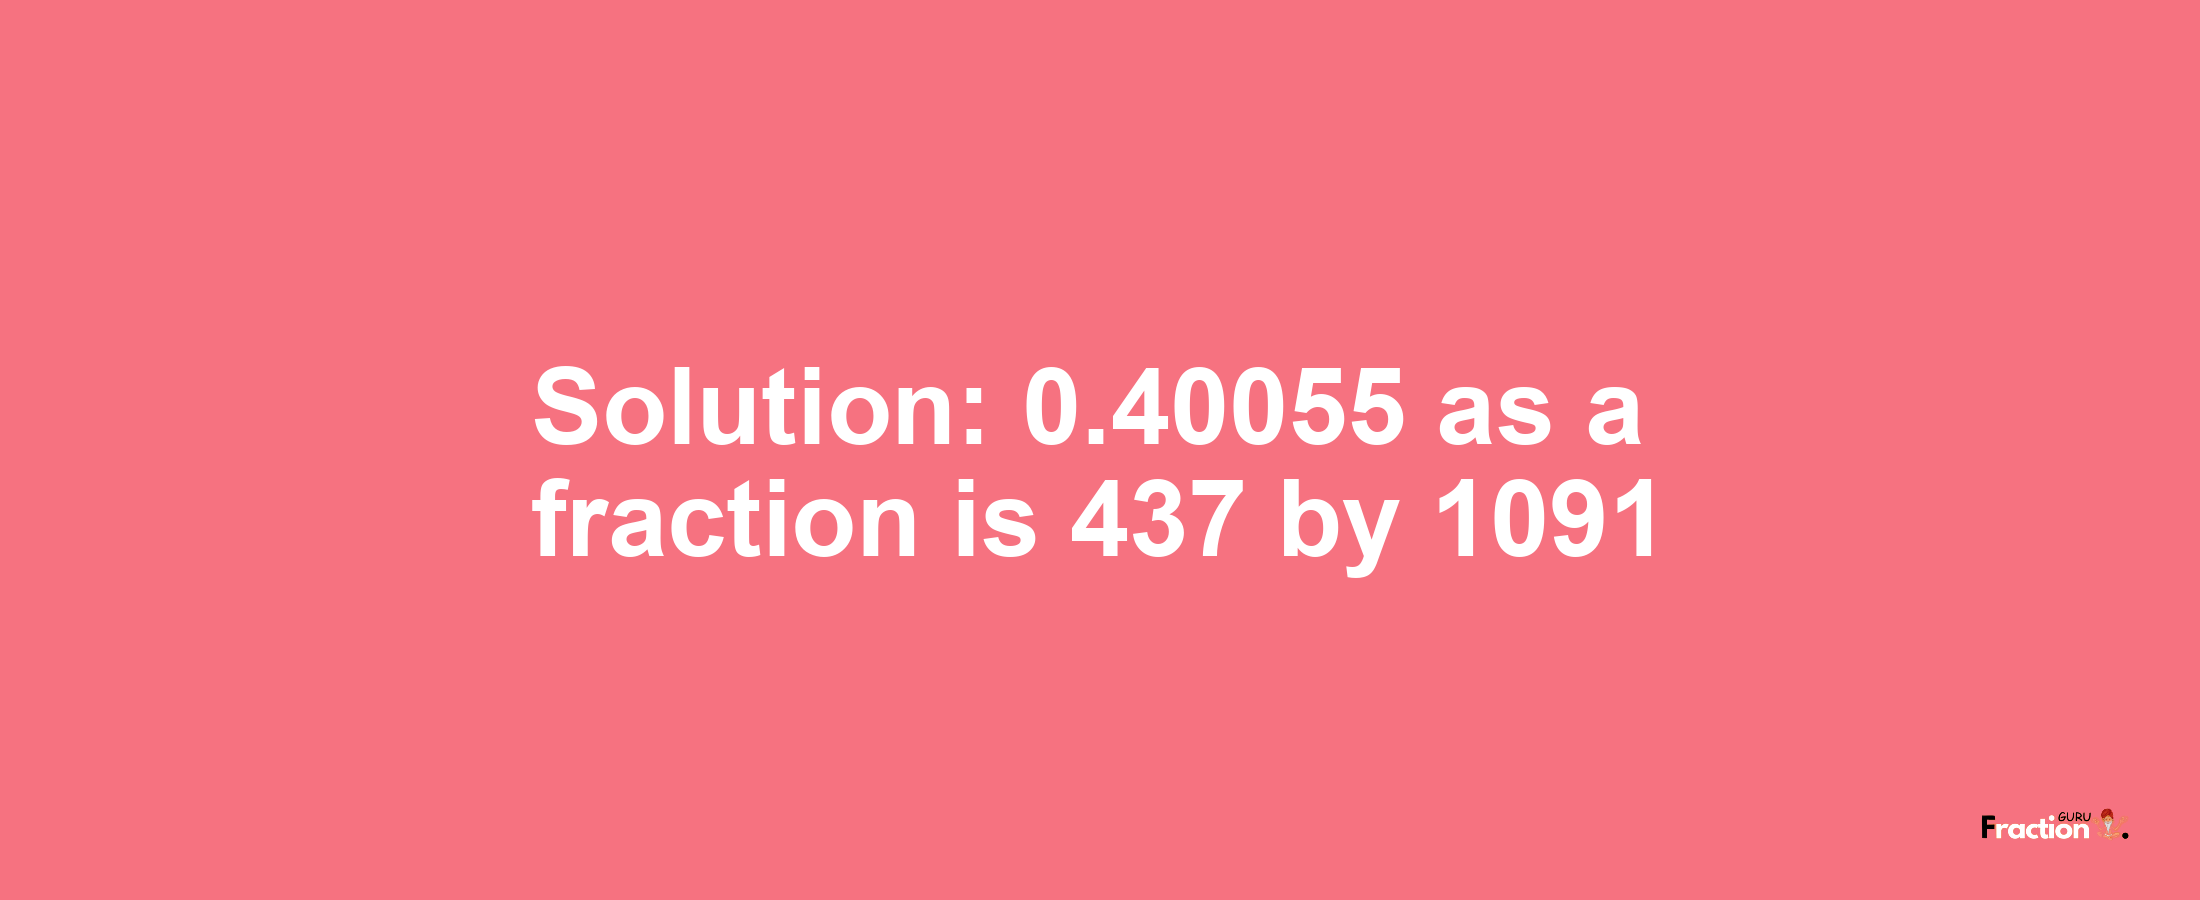 Solution:0.40055 as a fraction is 437/1091